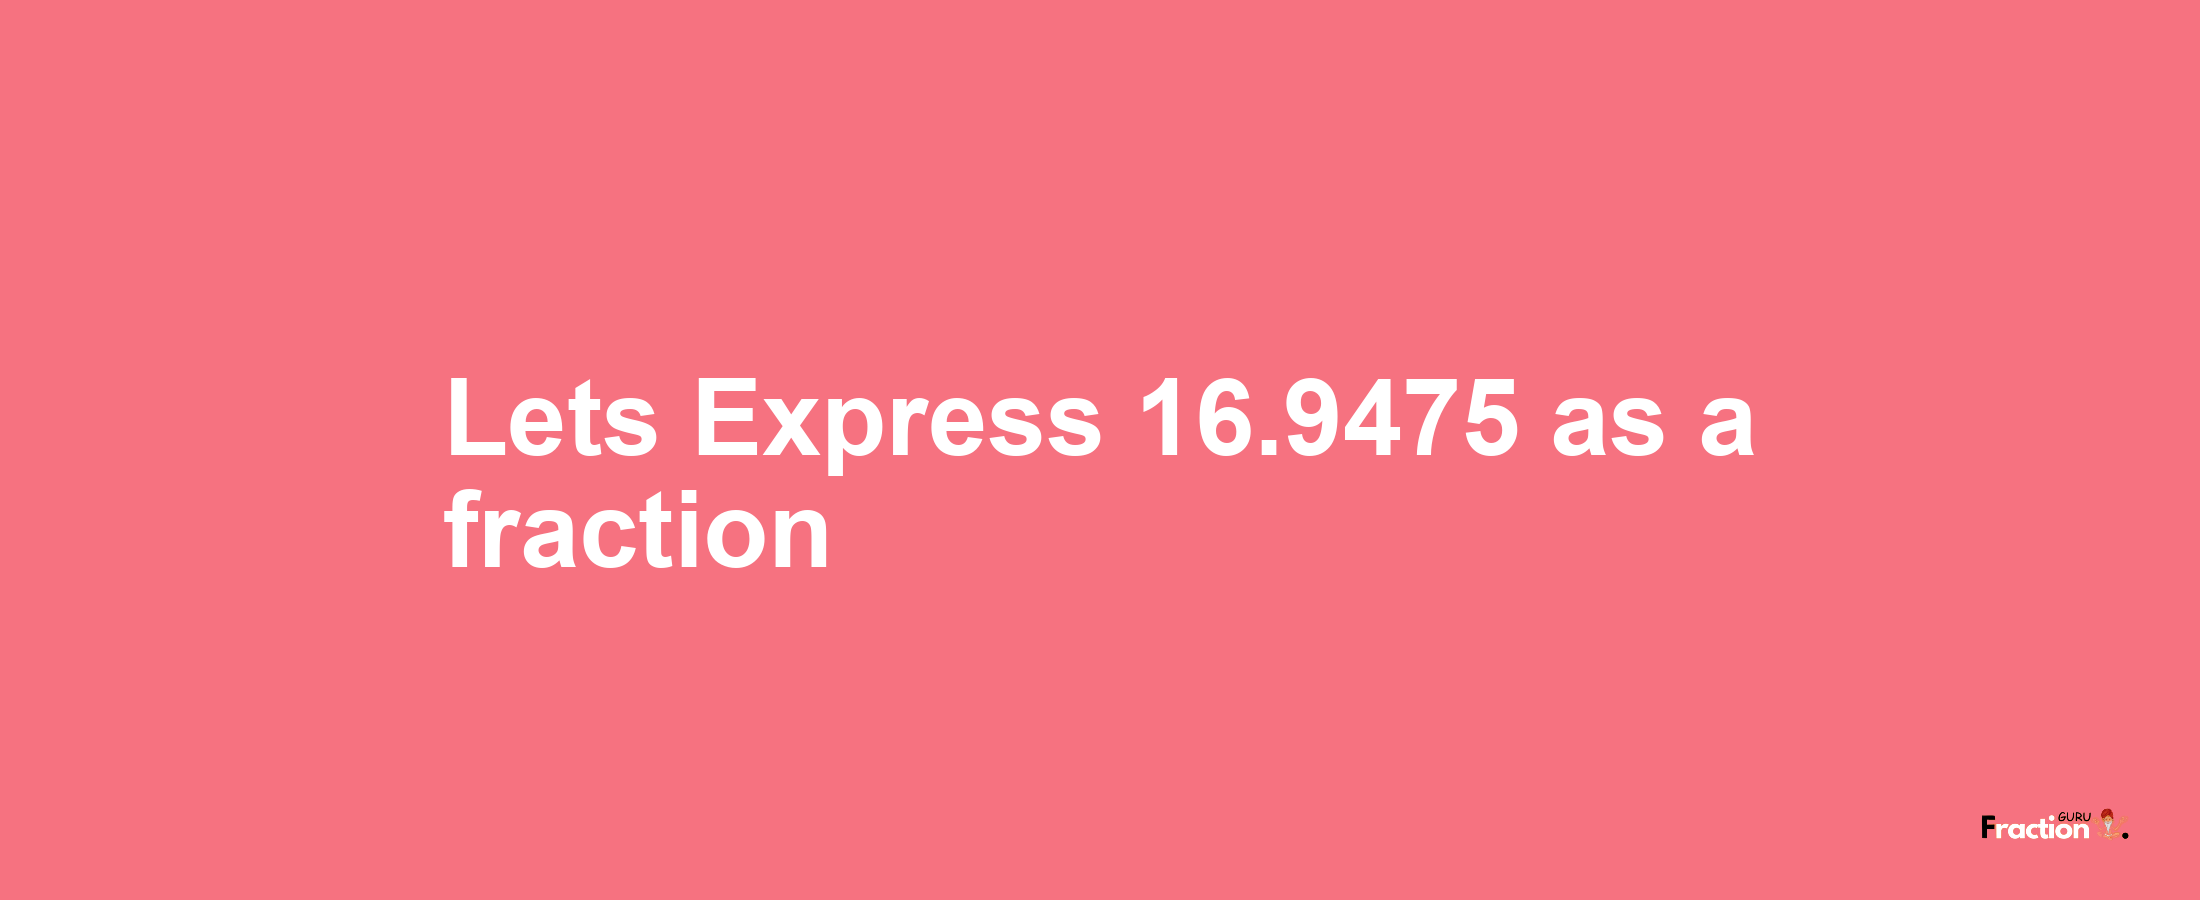 Lets Express 16.9475 as afraction